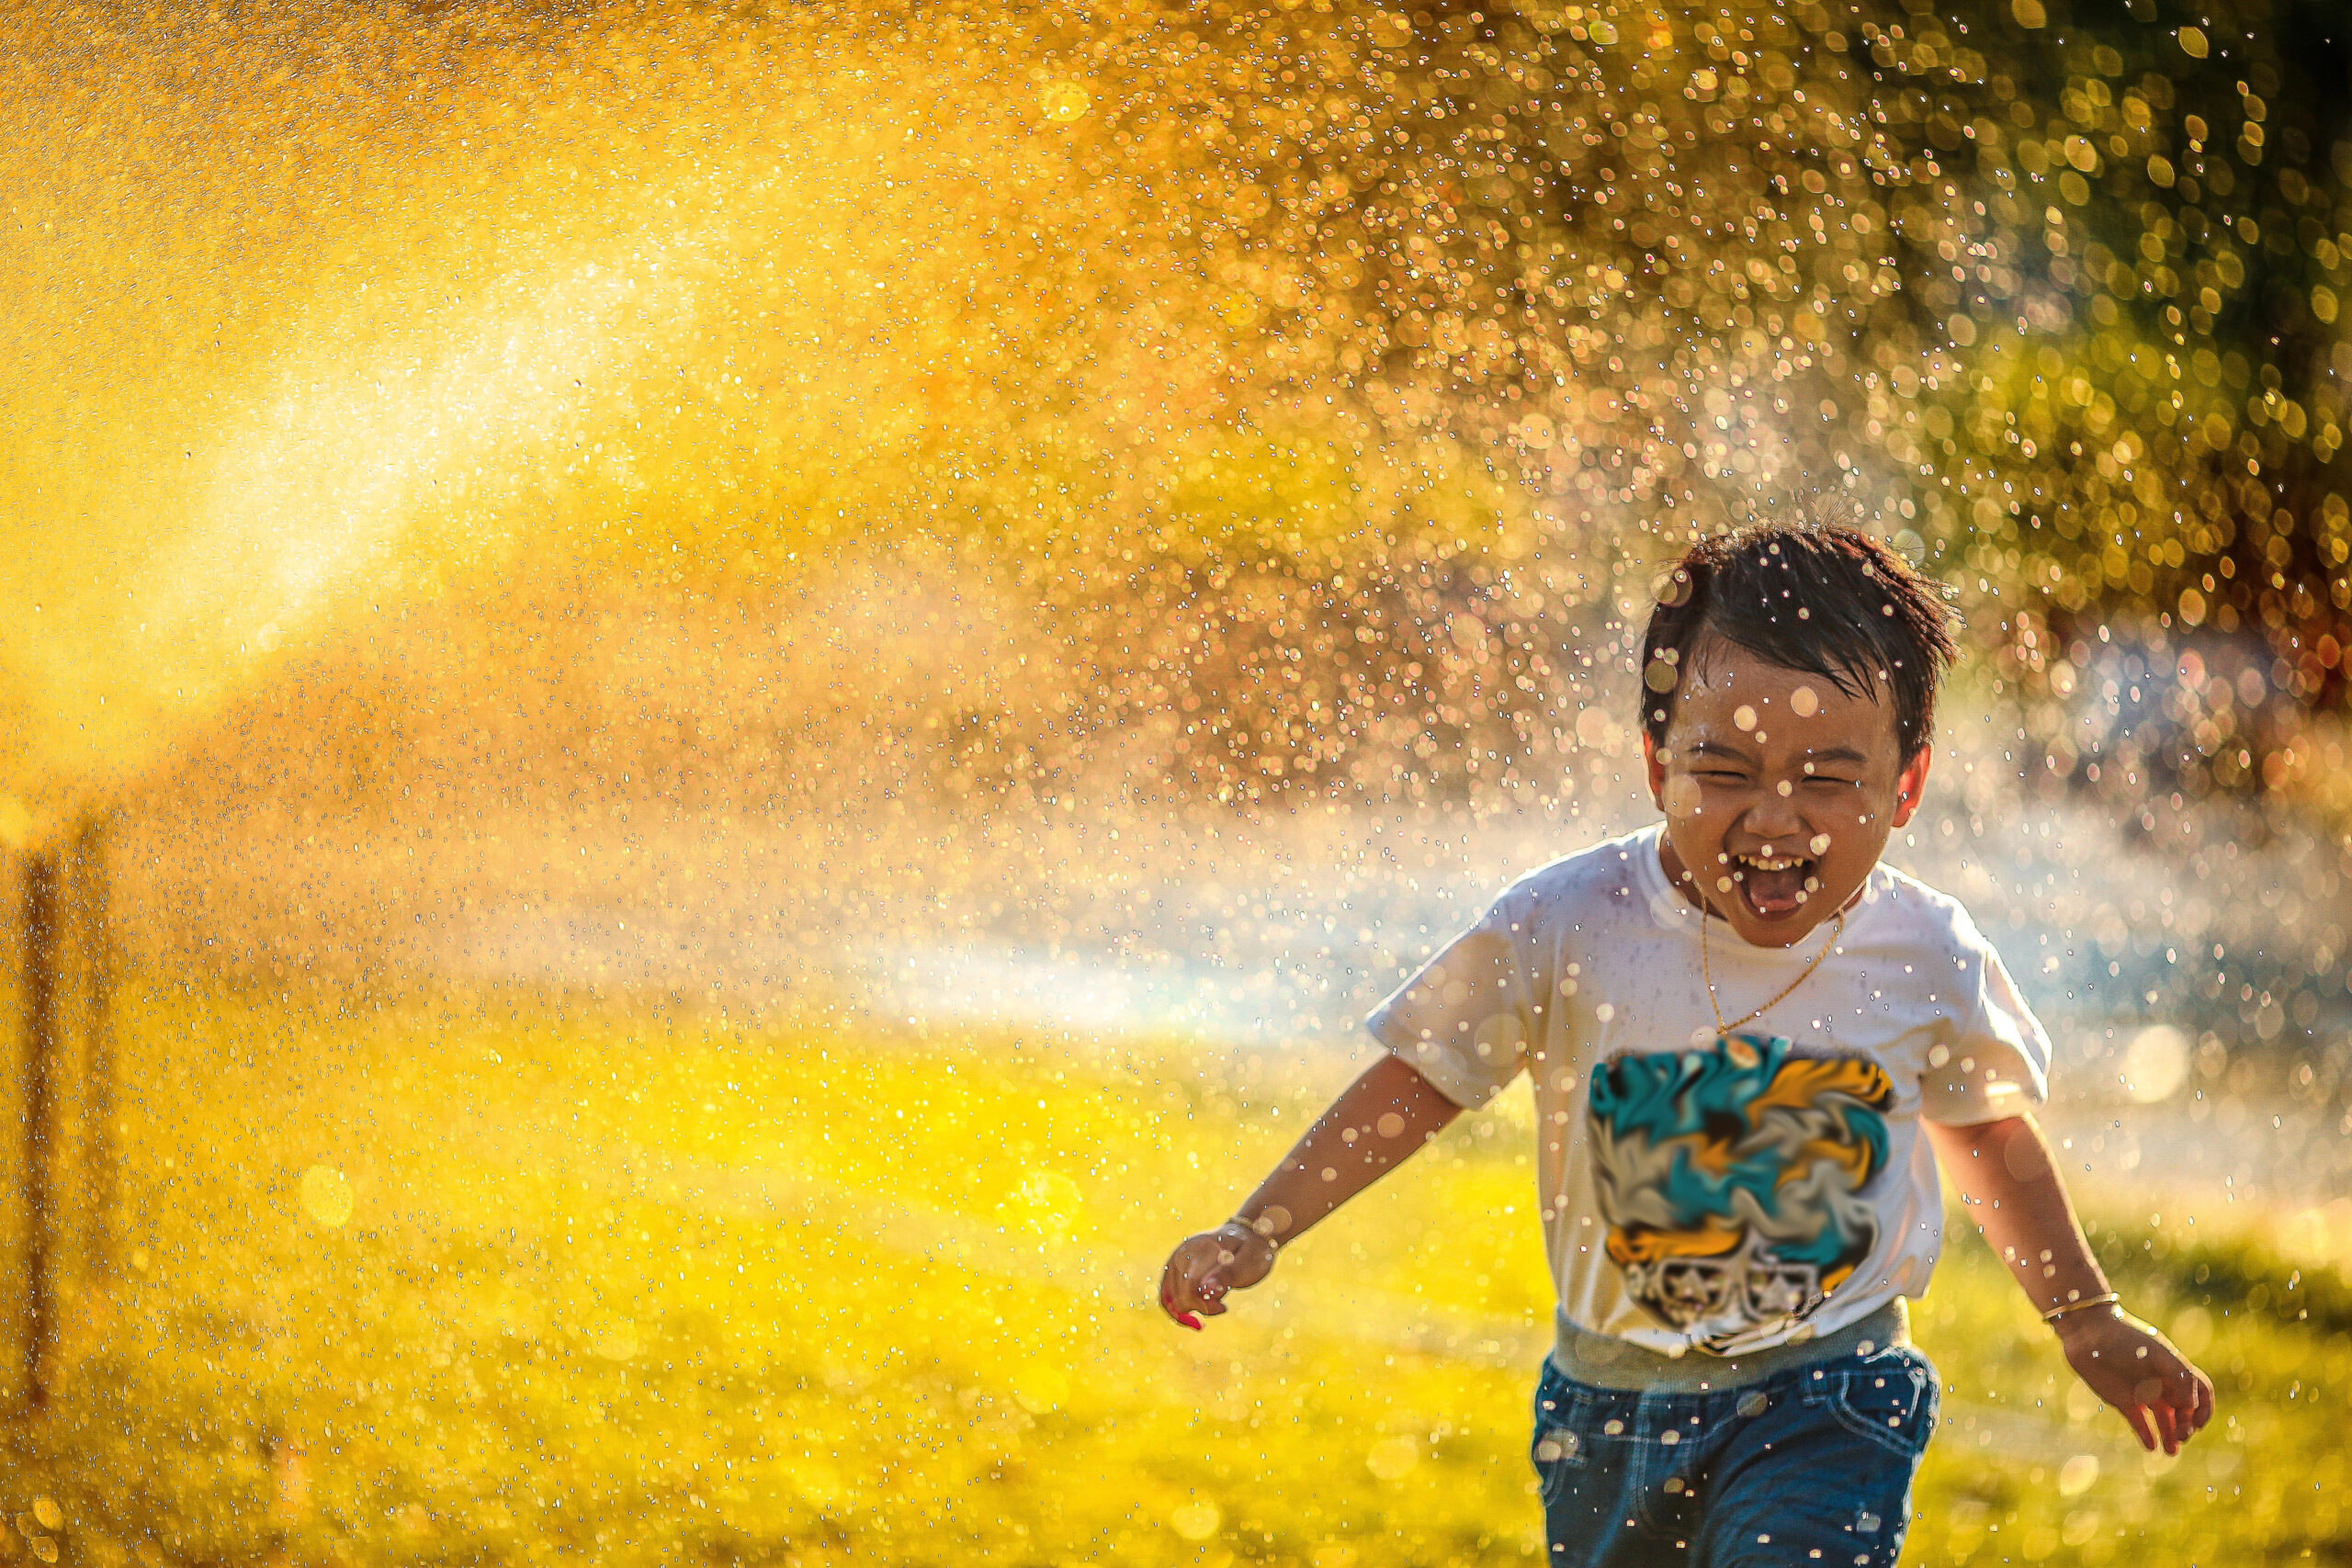 Background photo of a child running through a sprinkler